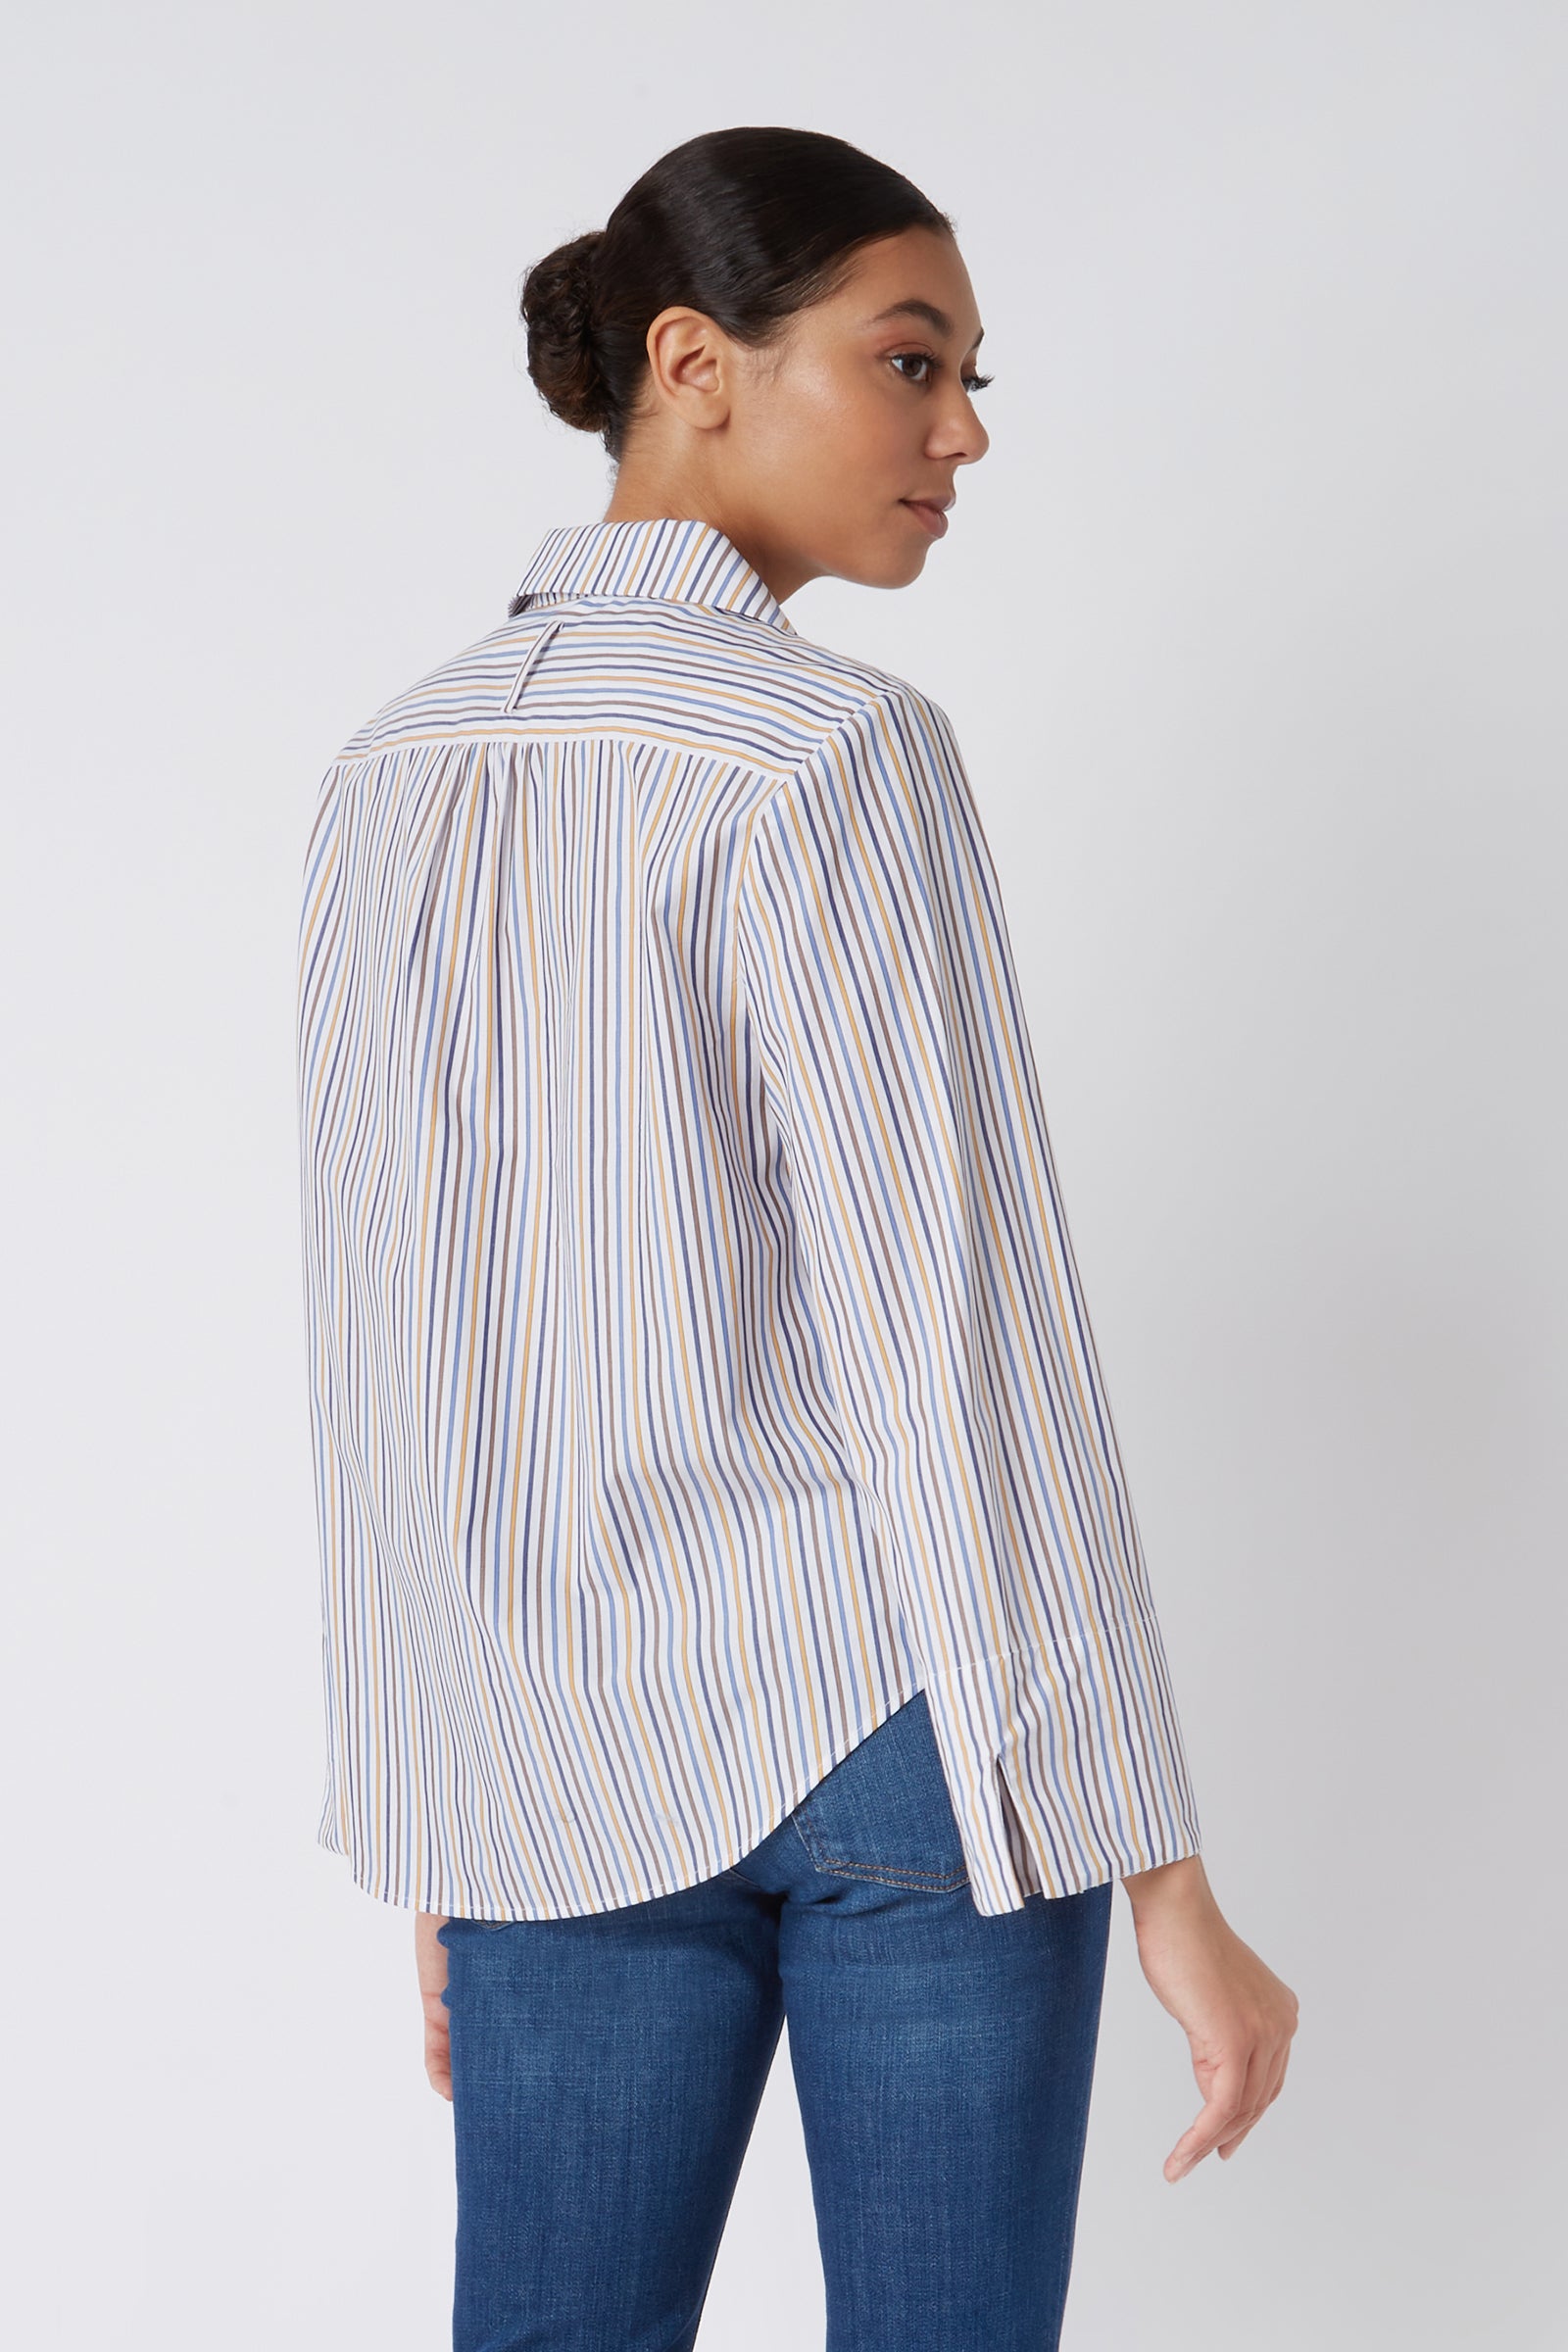 Kal Rieman Edie Collared Placket Shirt in Multi Stripe Gold on Model Cropped Front View